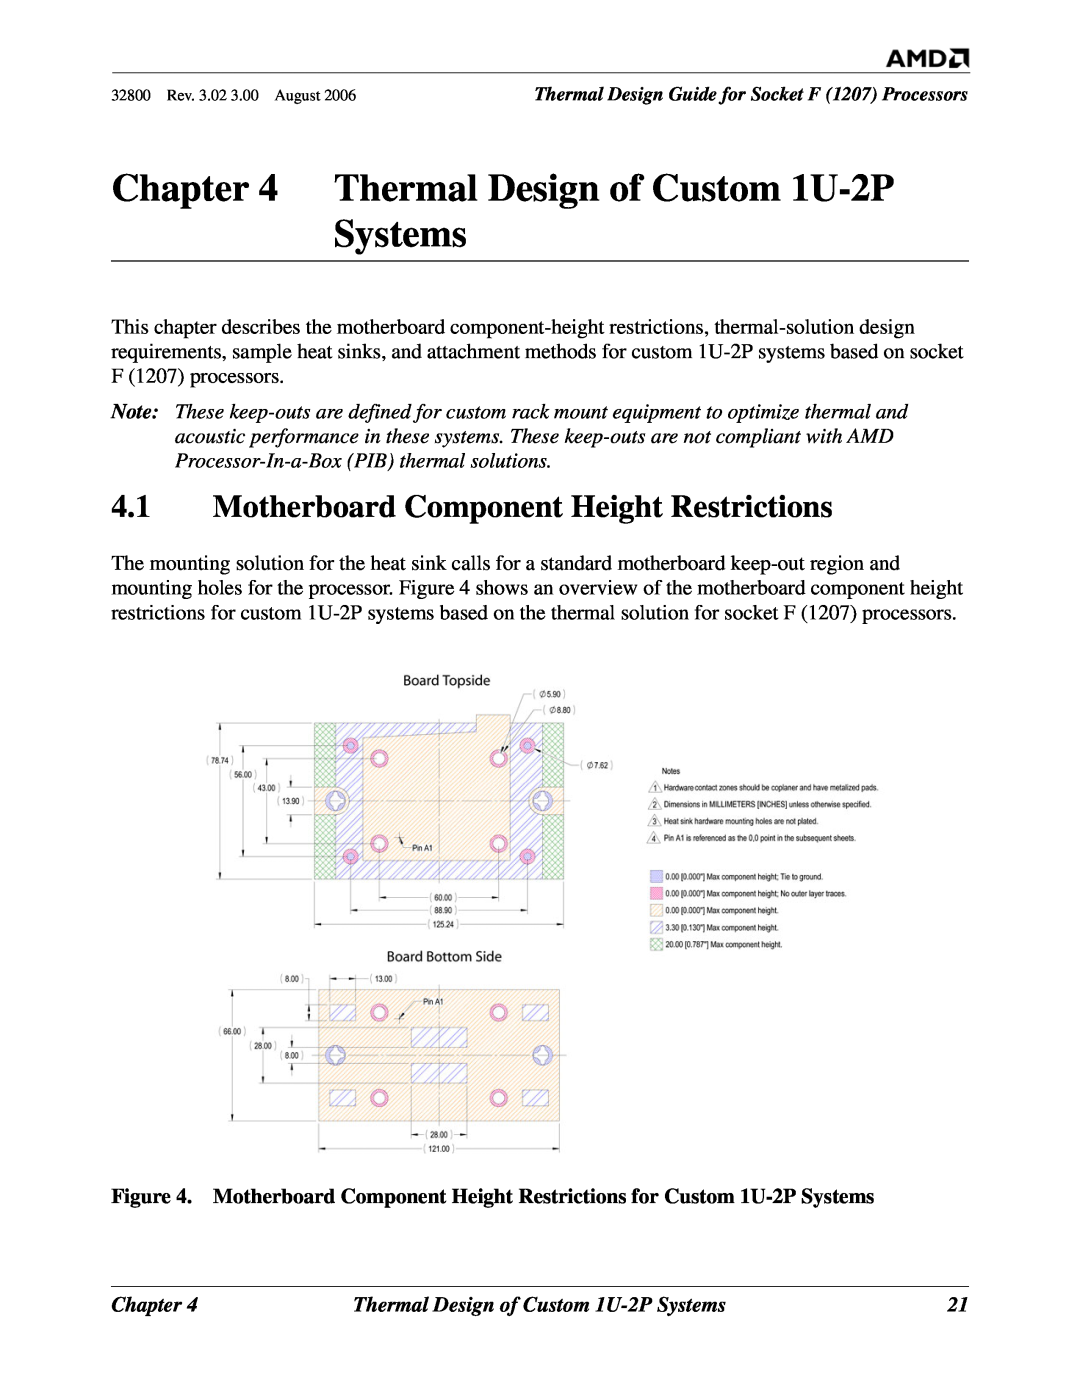 AMD 1207 manual Thermal Design of Custom 1U-2P Systems, Motherboard Component Height Restrictions, Chapter 